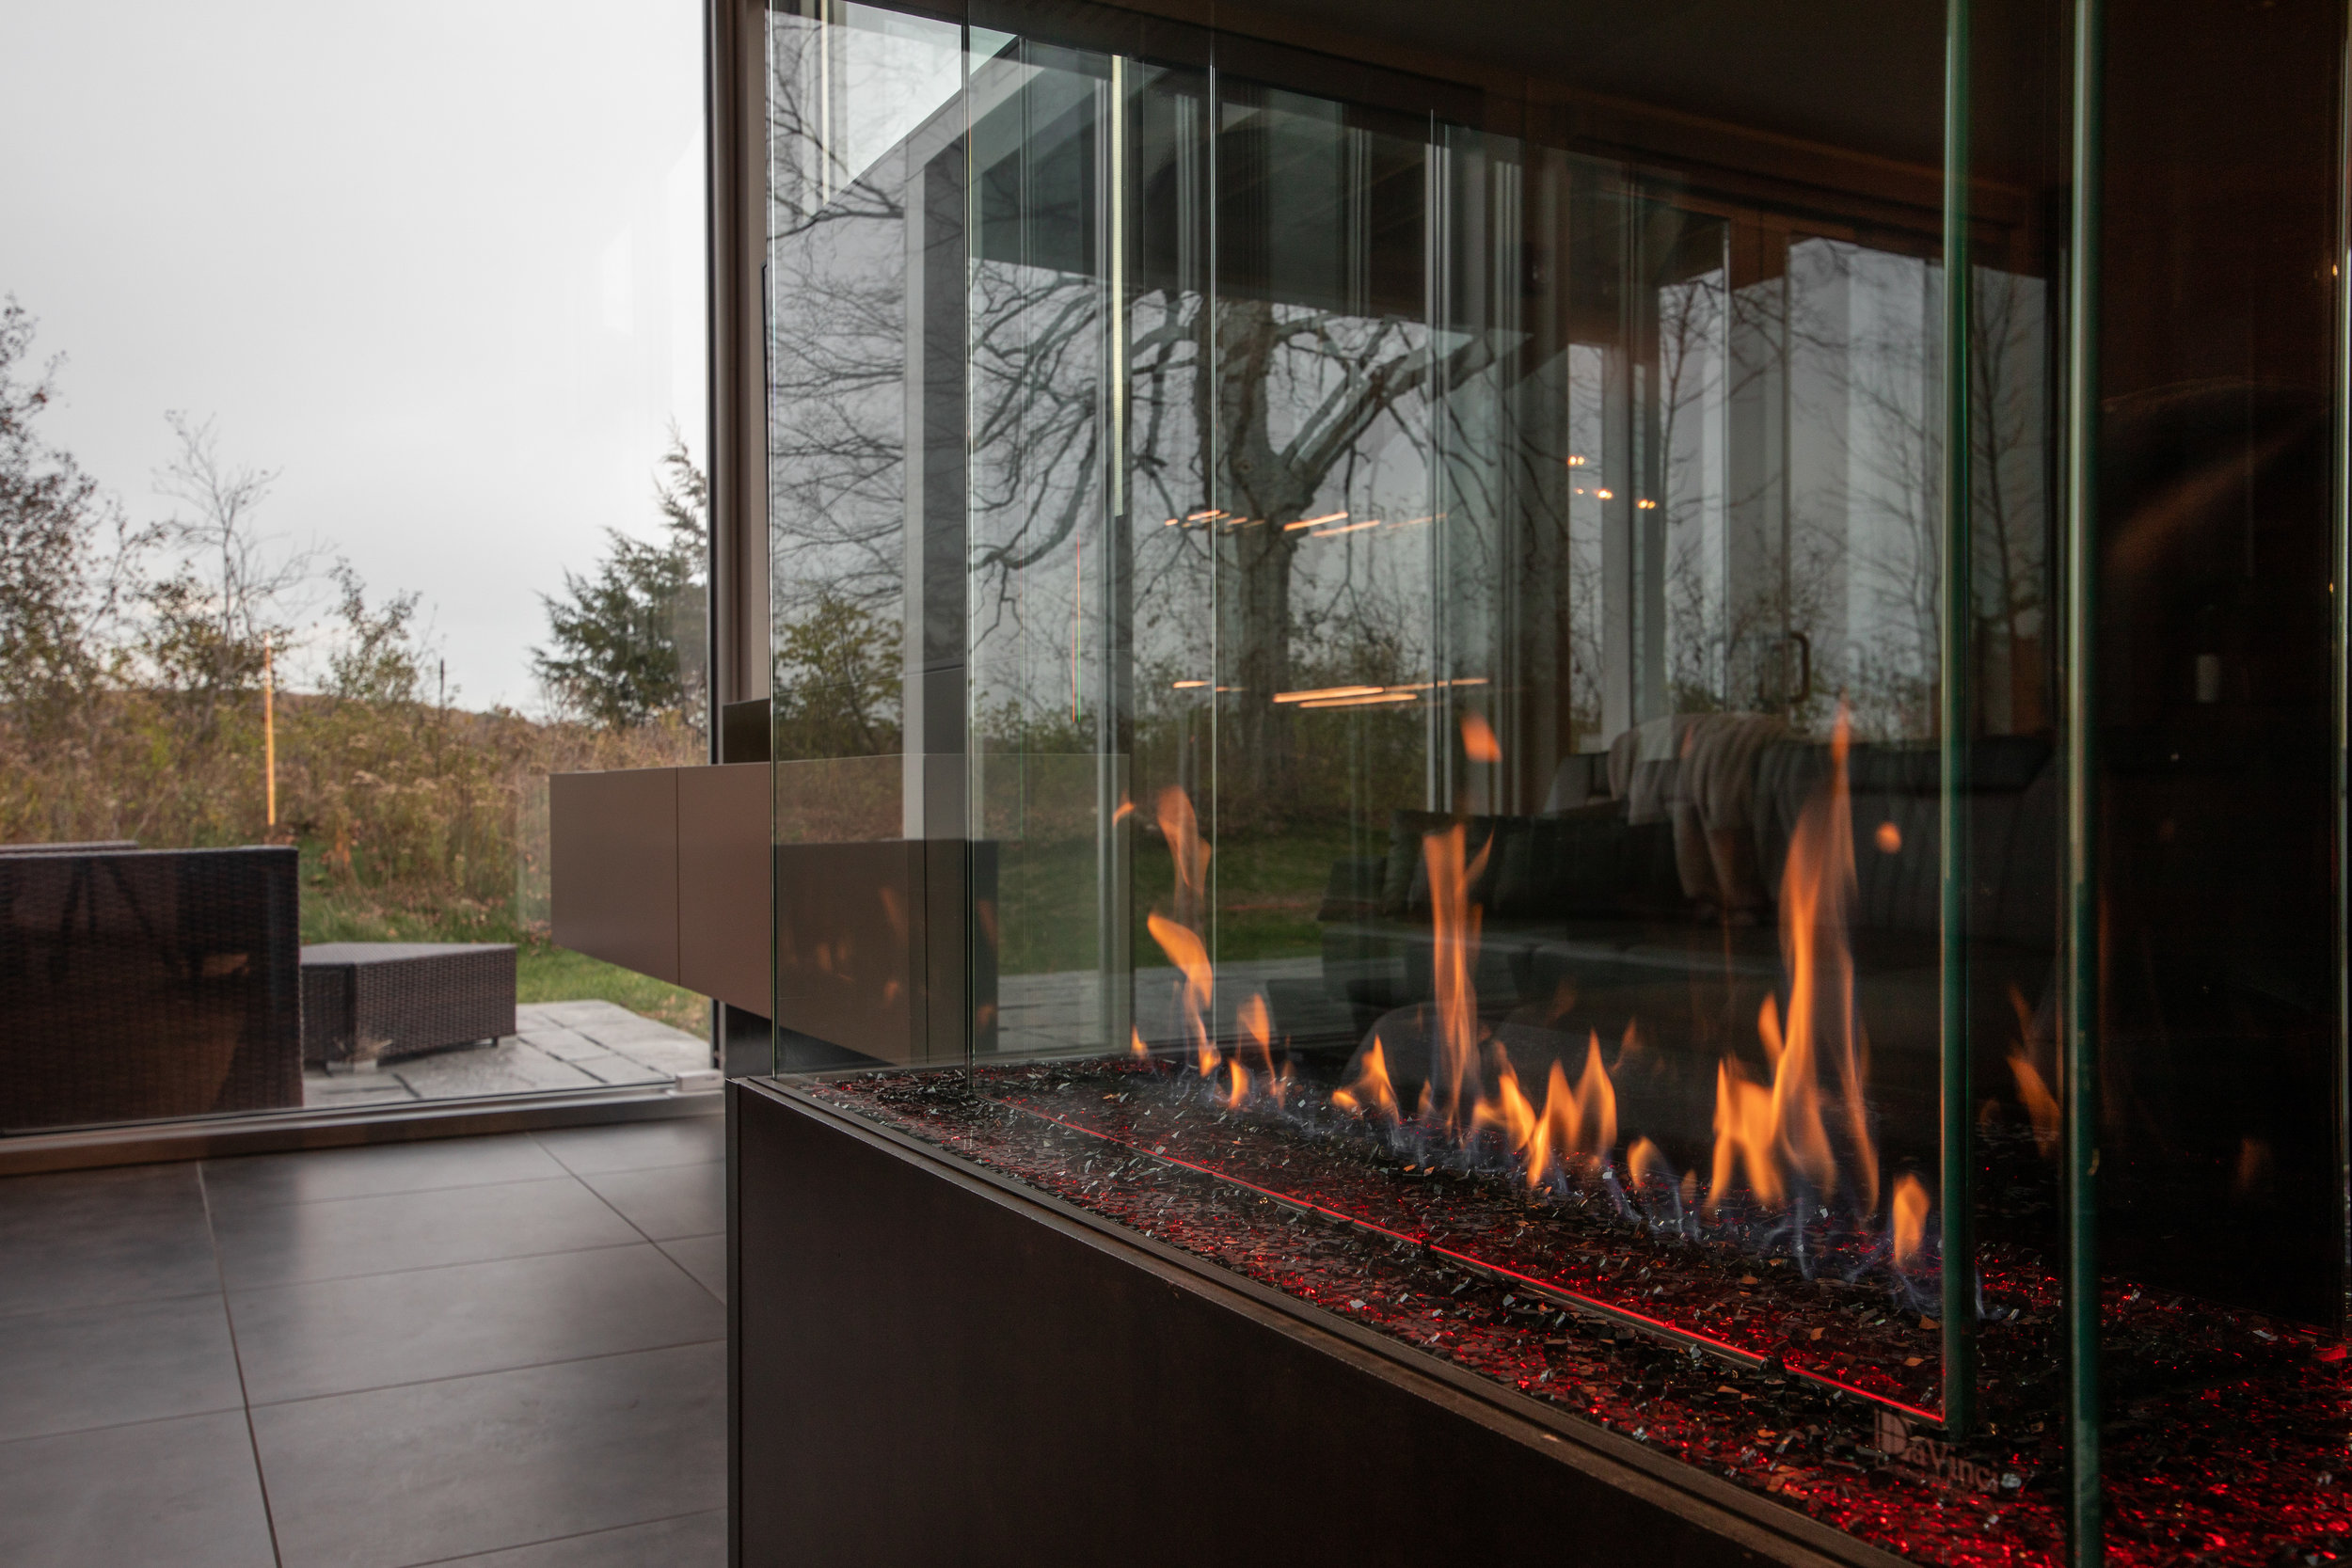 Monte Carlo features a custom, three-sided, fireplace for those relaxing nights in.